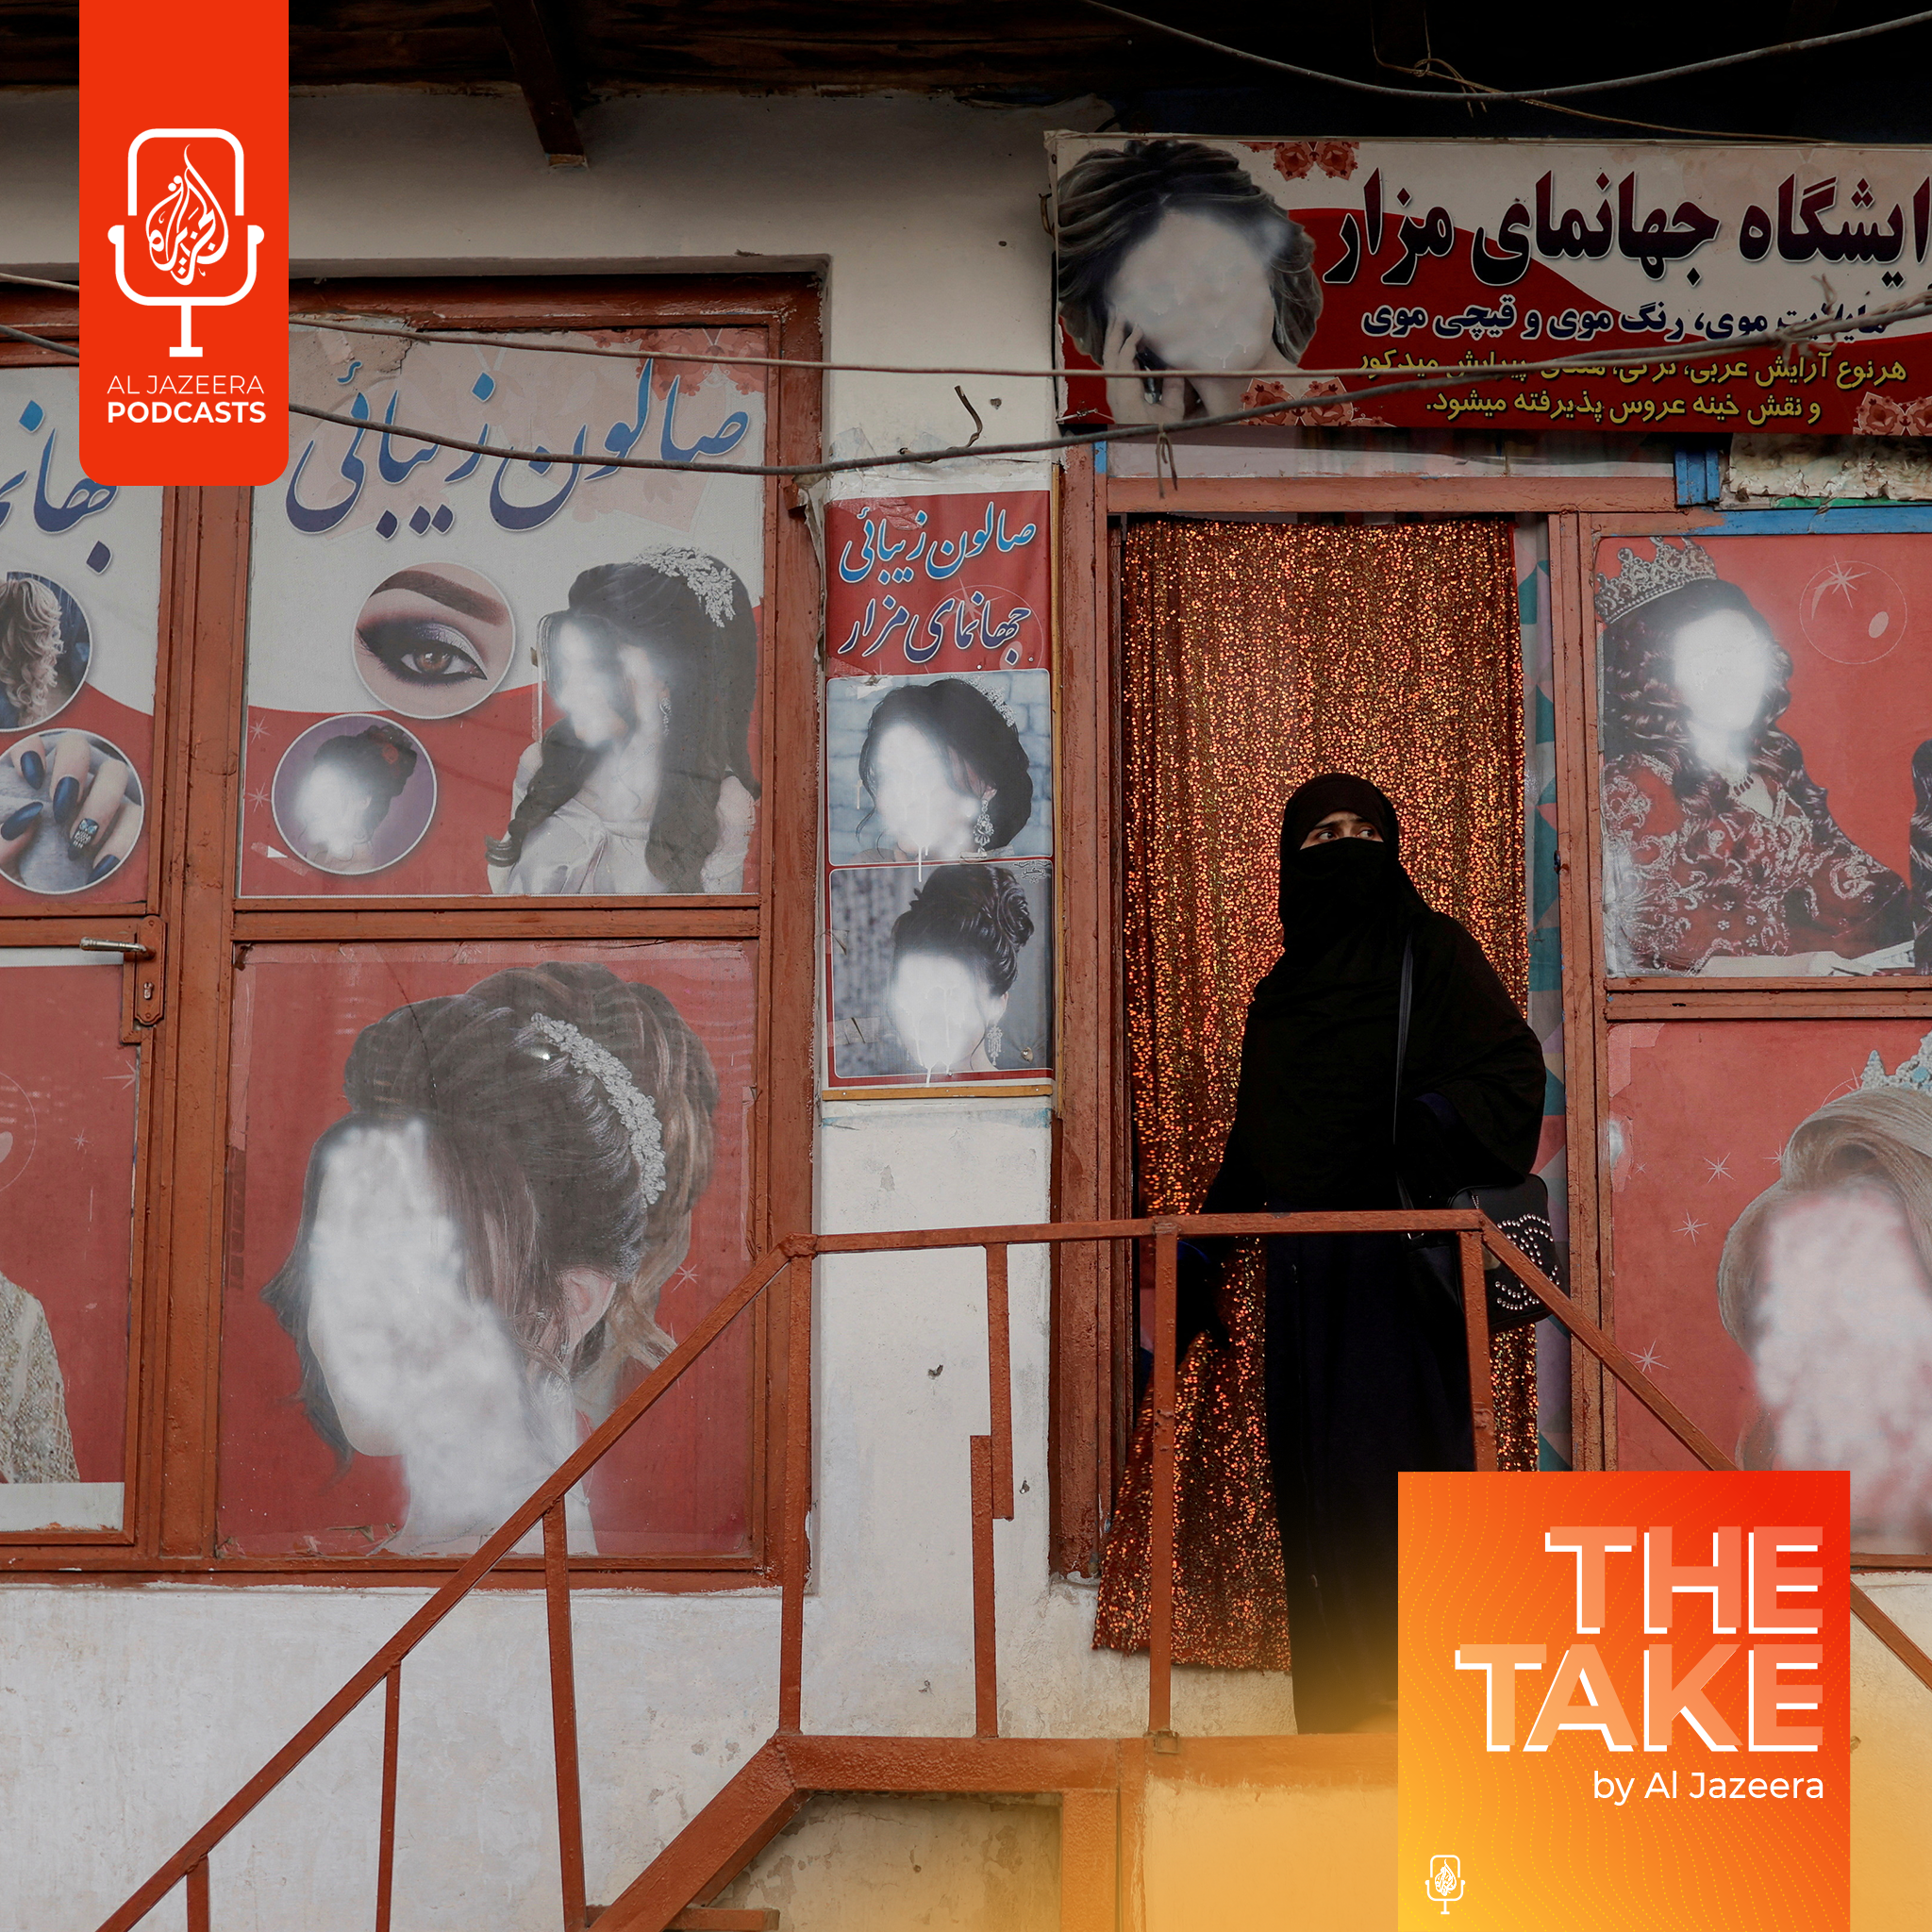 Shutting down Afghanistan’s beauty salons